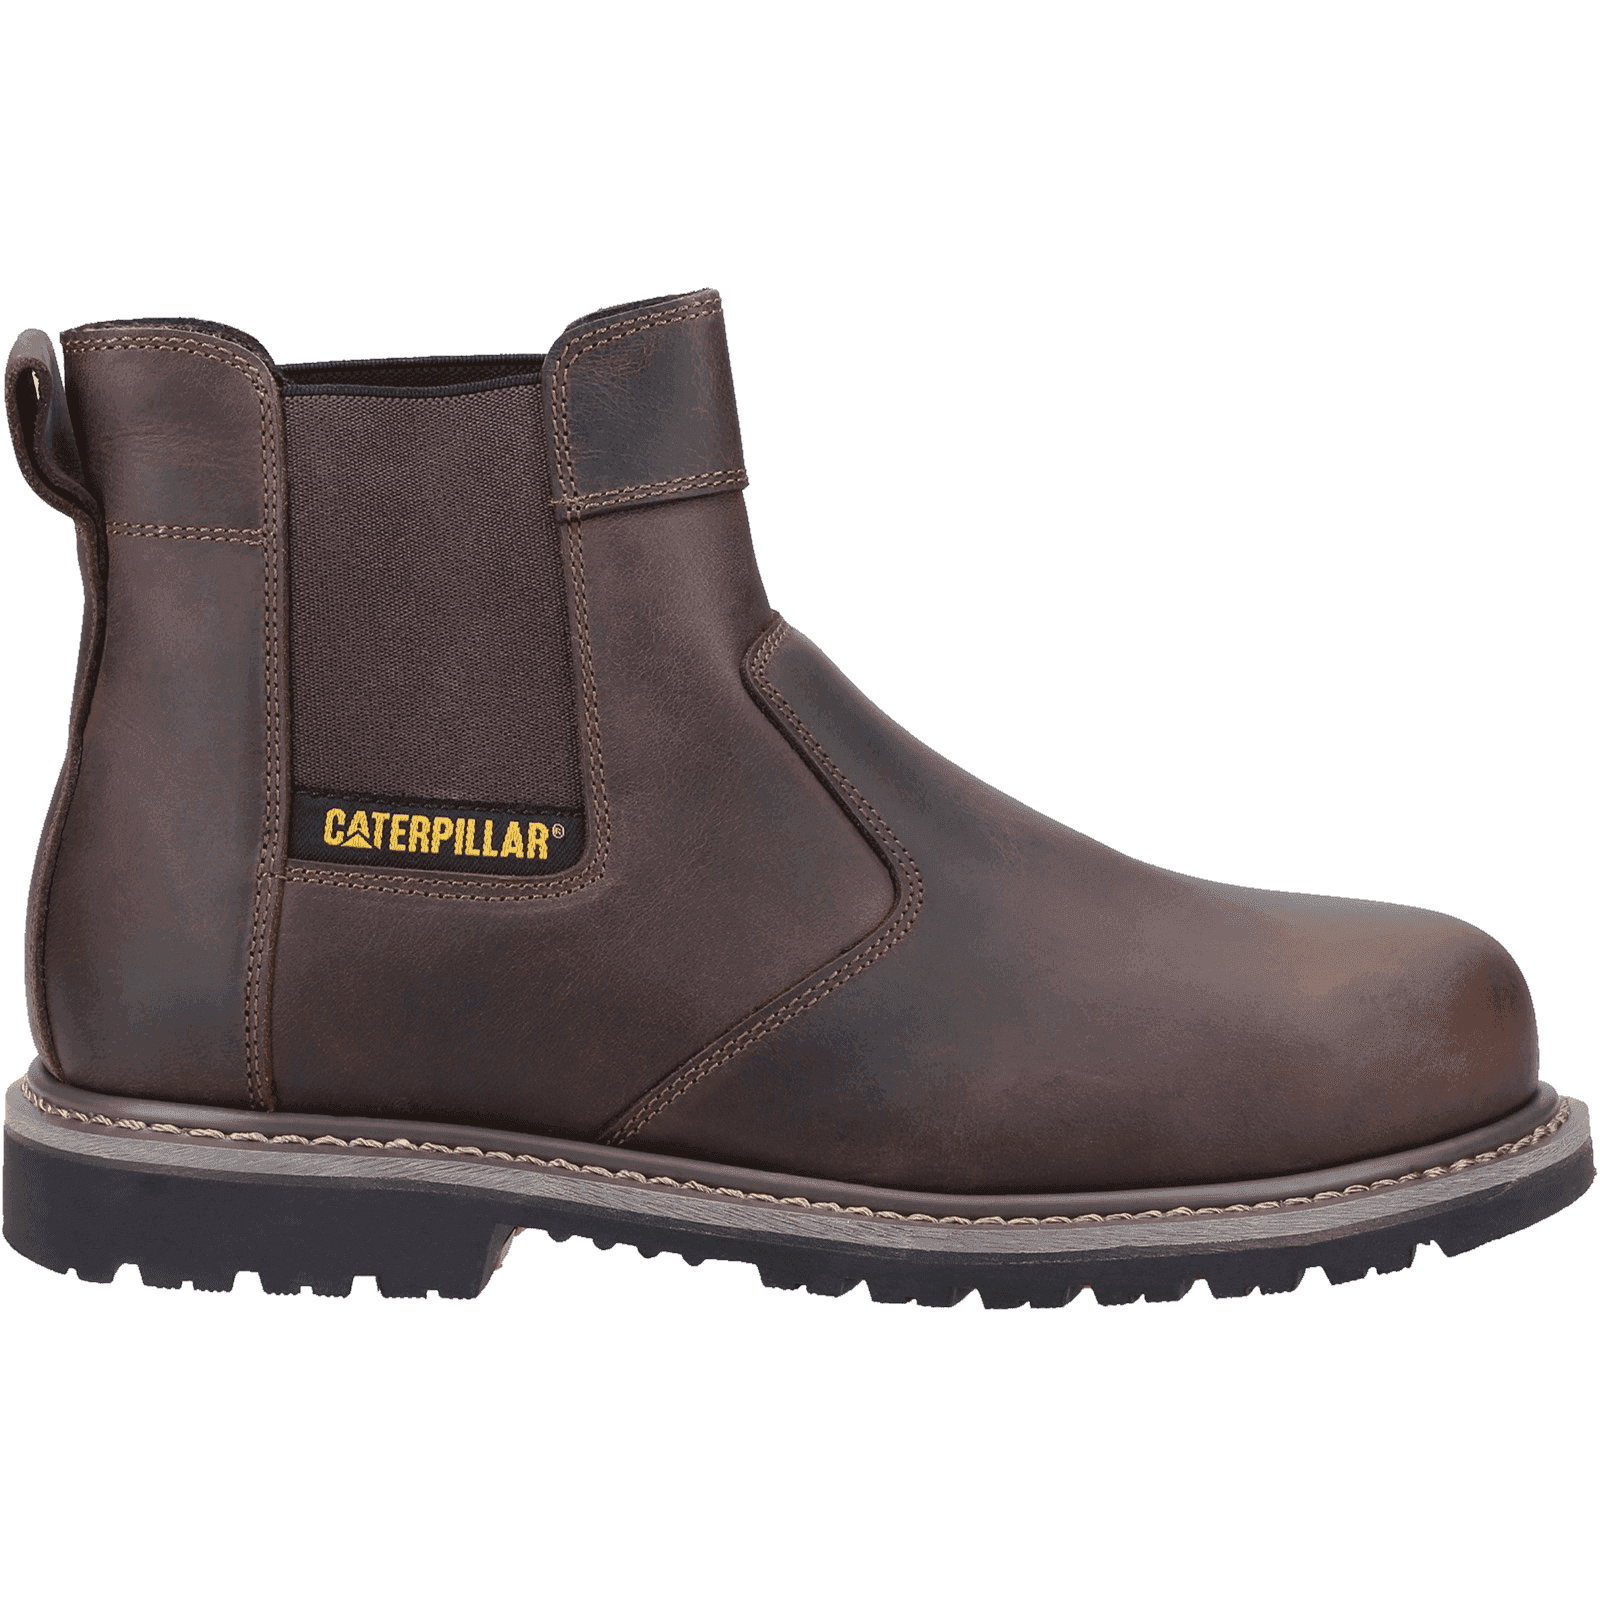 Powerplant Dealer Safety Boots CAT